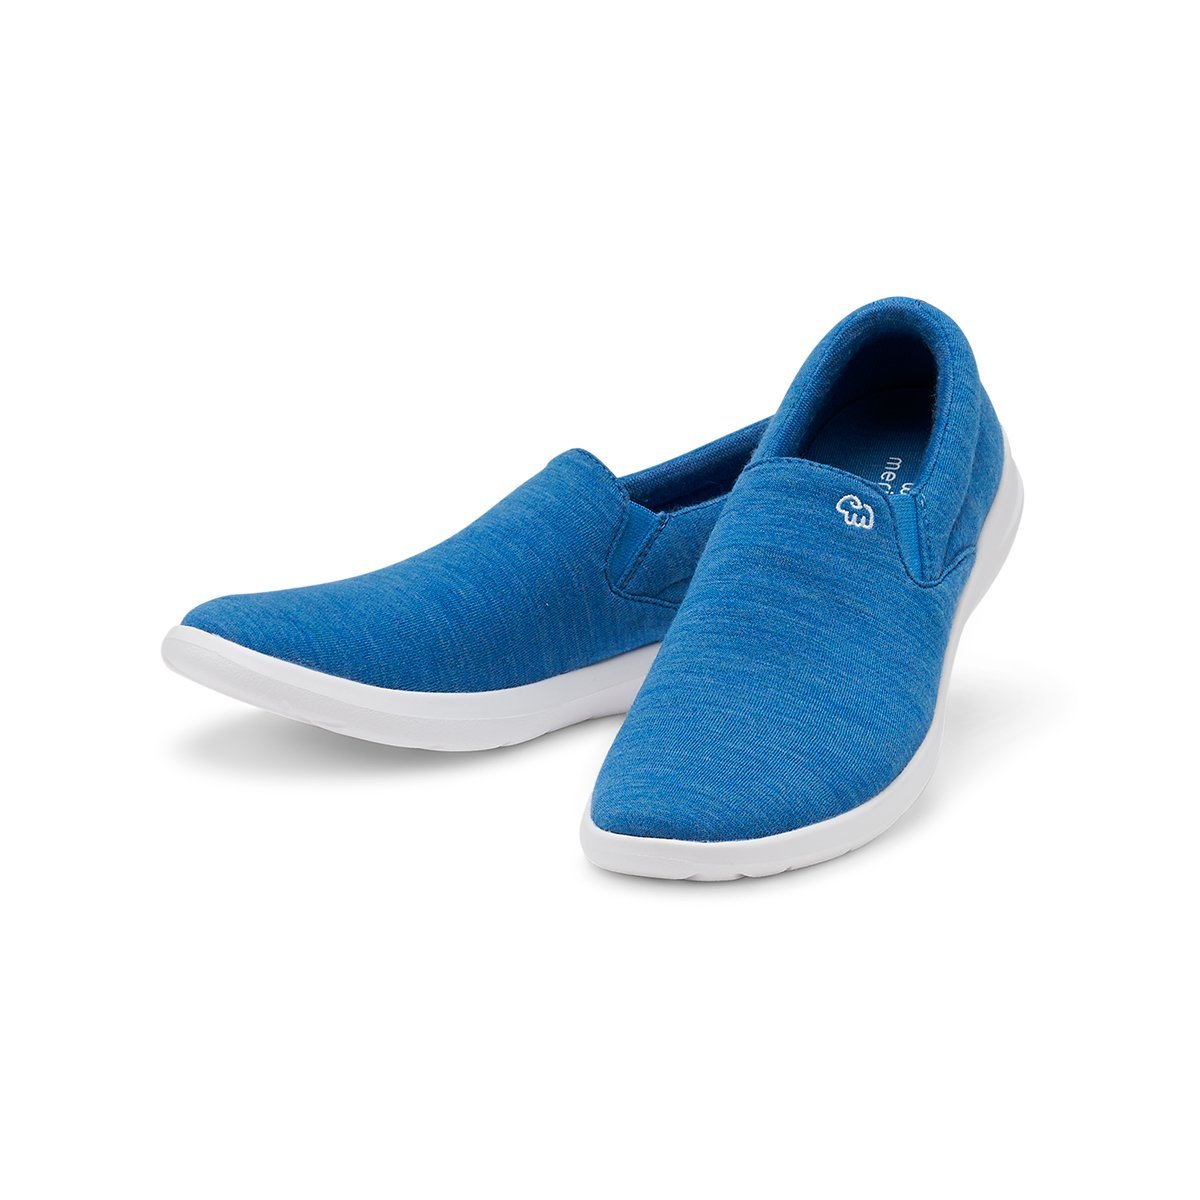 Women's Slip-Ons Bright Blue - Special Offer